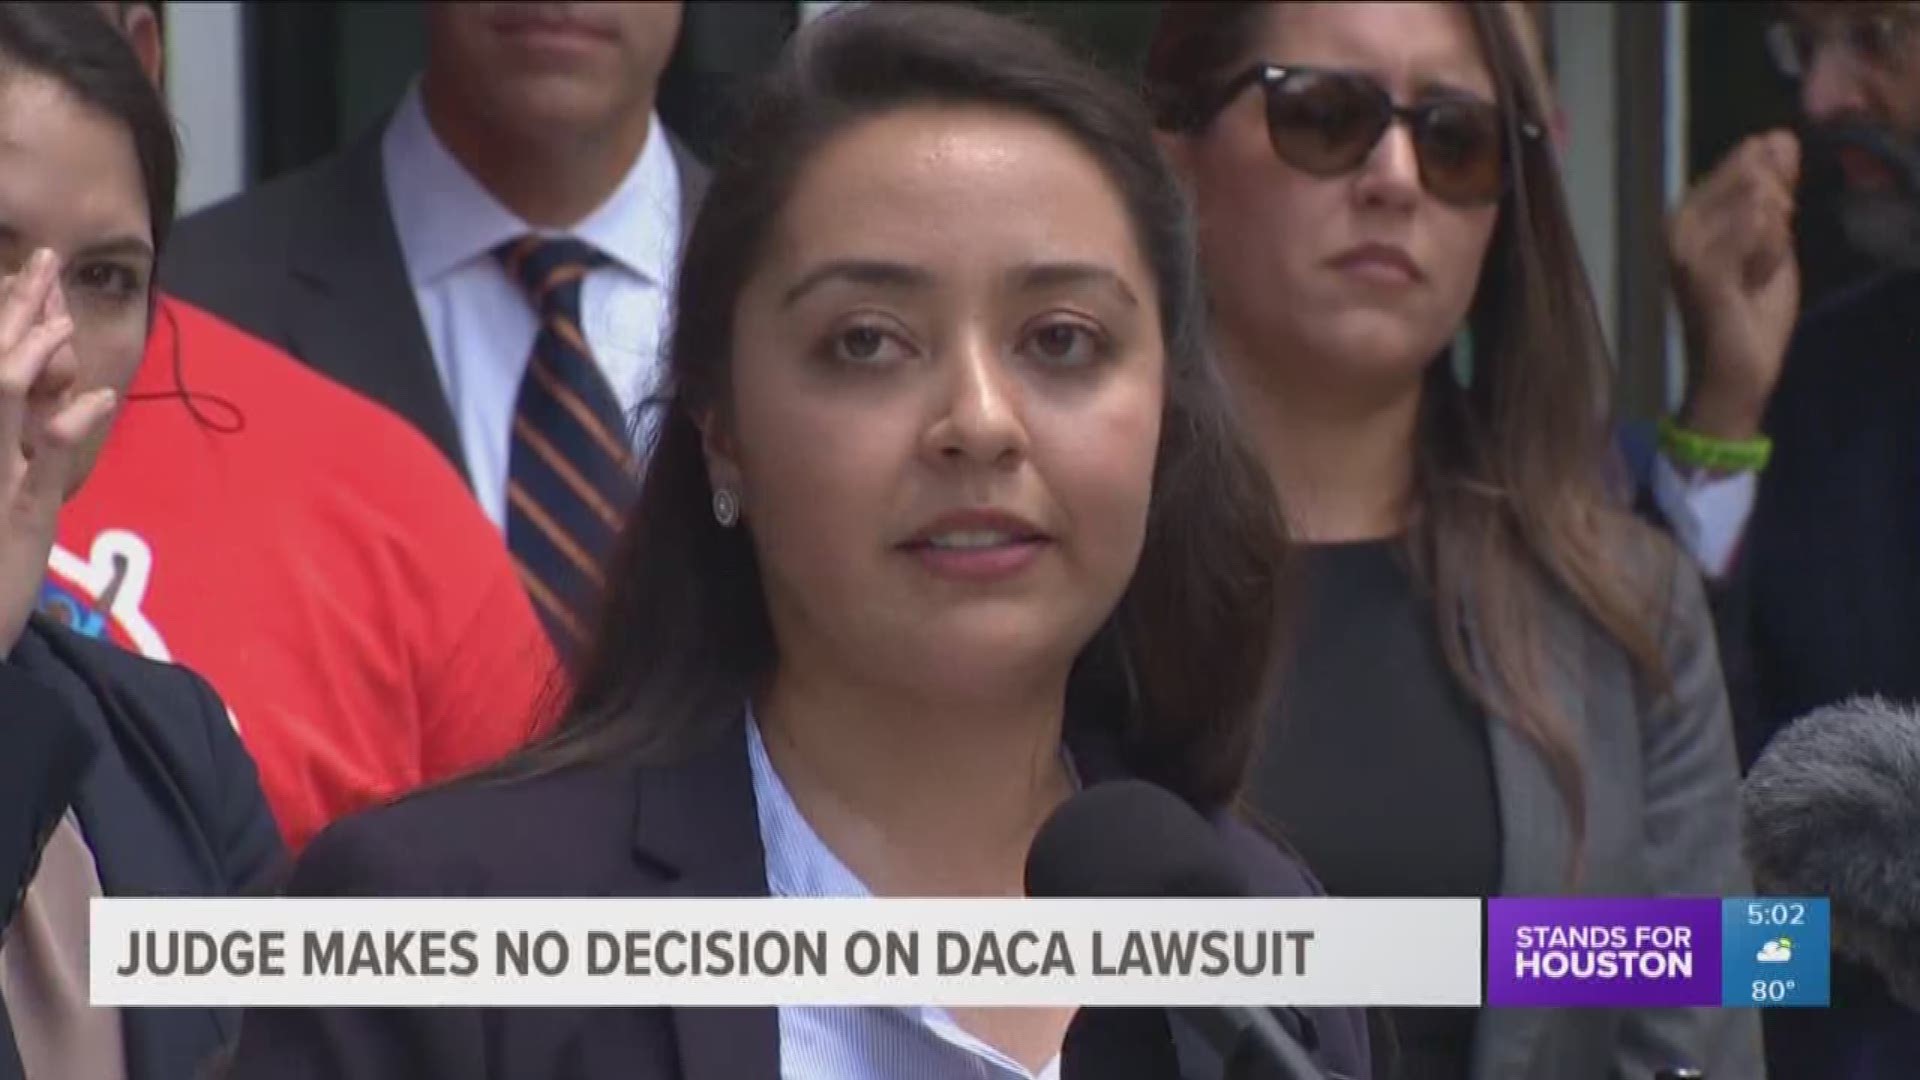 For now, DACA will remain in place for hundreds of thousands of undocumented immigrants living in the U.S., as a federal judge chose not to issue a ruling Wednesday.